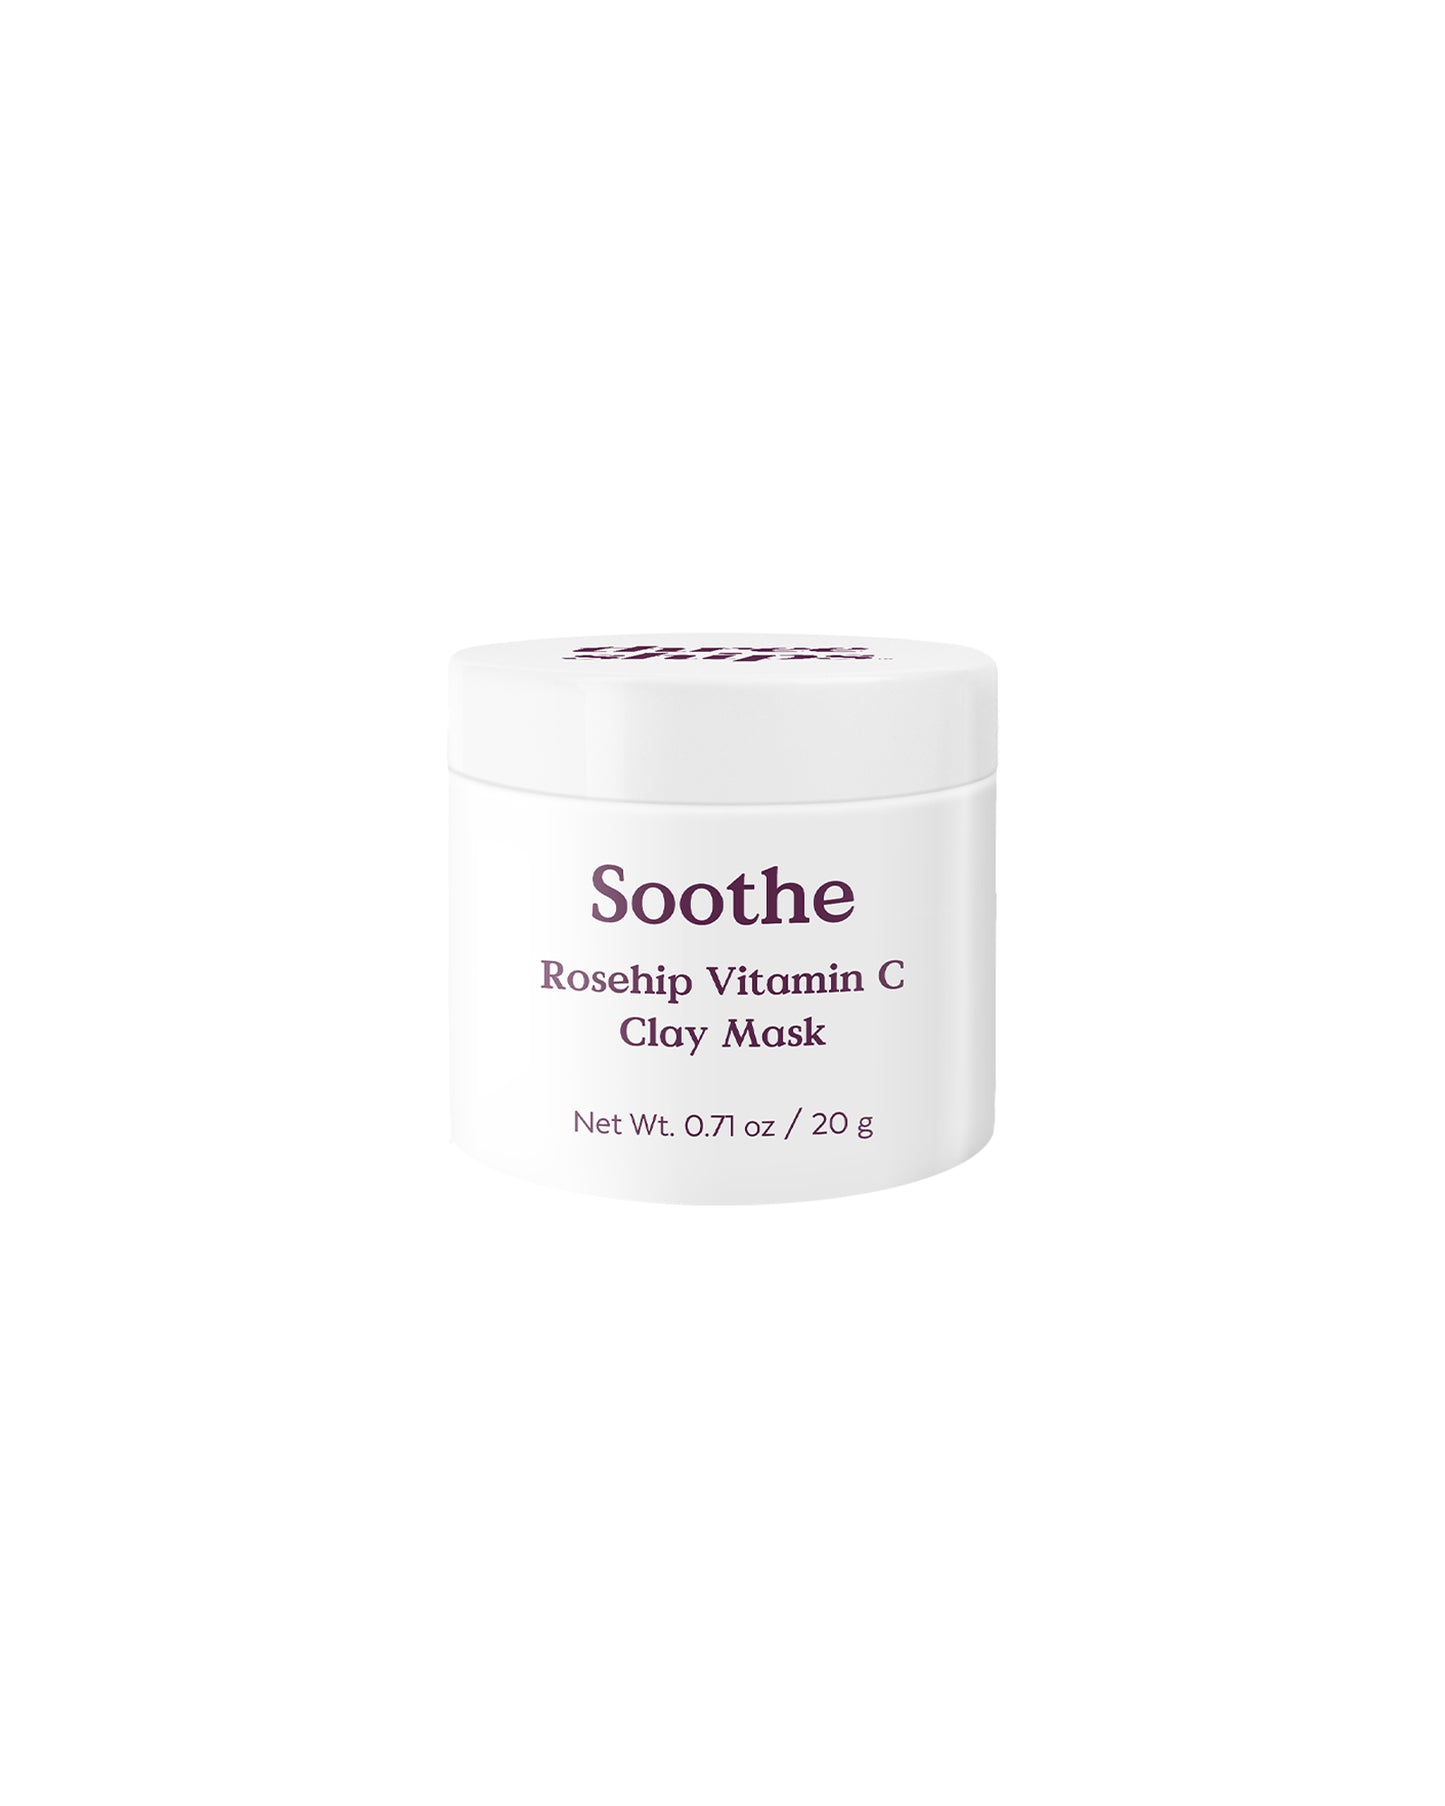 Soothe Rosehip & Vitamin C Clay Mask